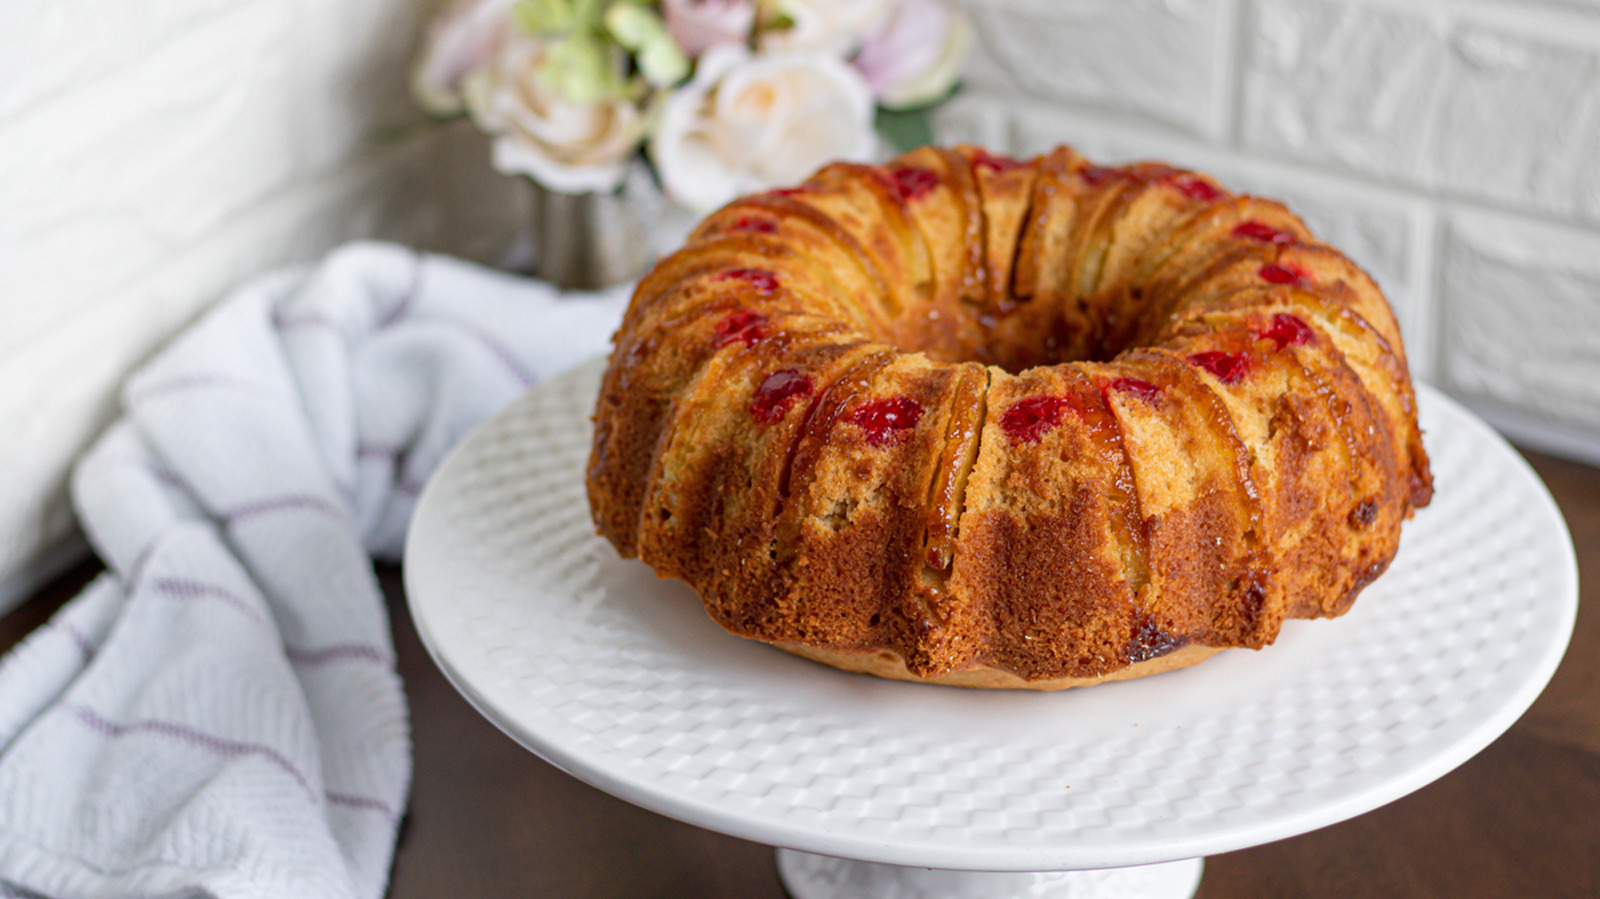 https://www.mashed.com/img/gallery/homemade-pineapple-upside-down-bundt-cake-from-scratch/l-intro-1620923779.jpg